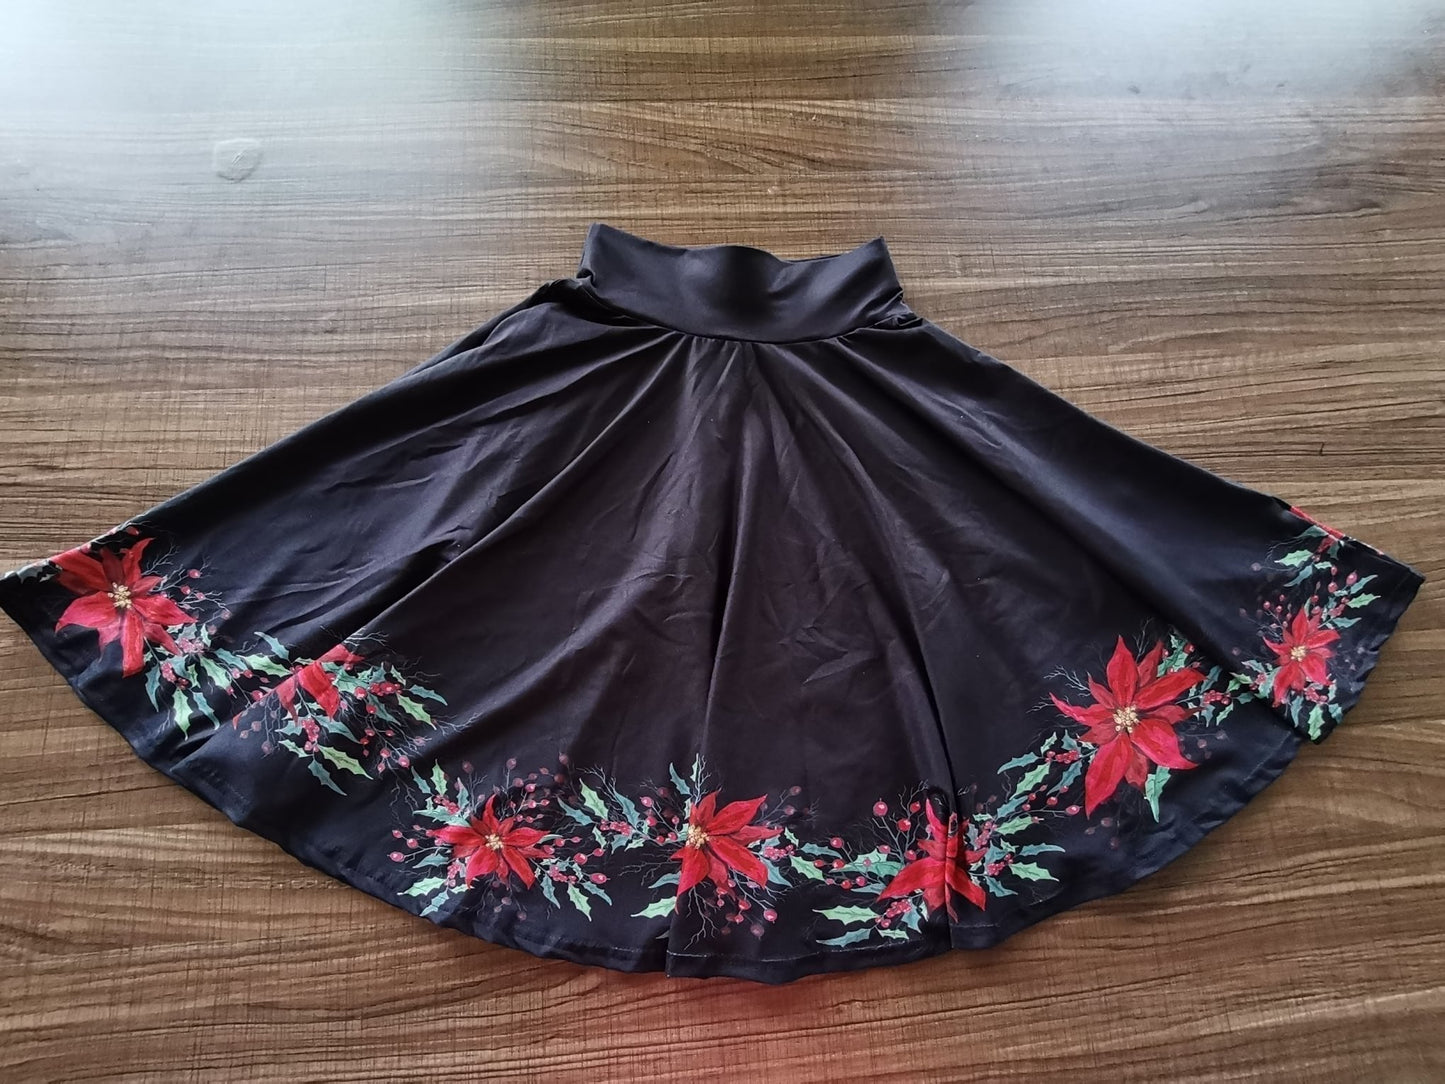 KILLER COFFEE 2.0 -NO PLACE- SWING SKIRT PREORDER CLOSING 5/2